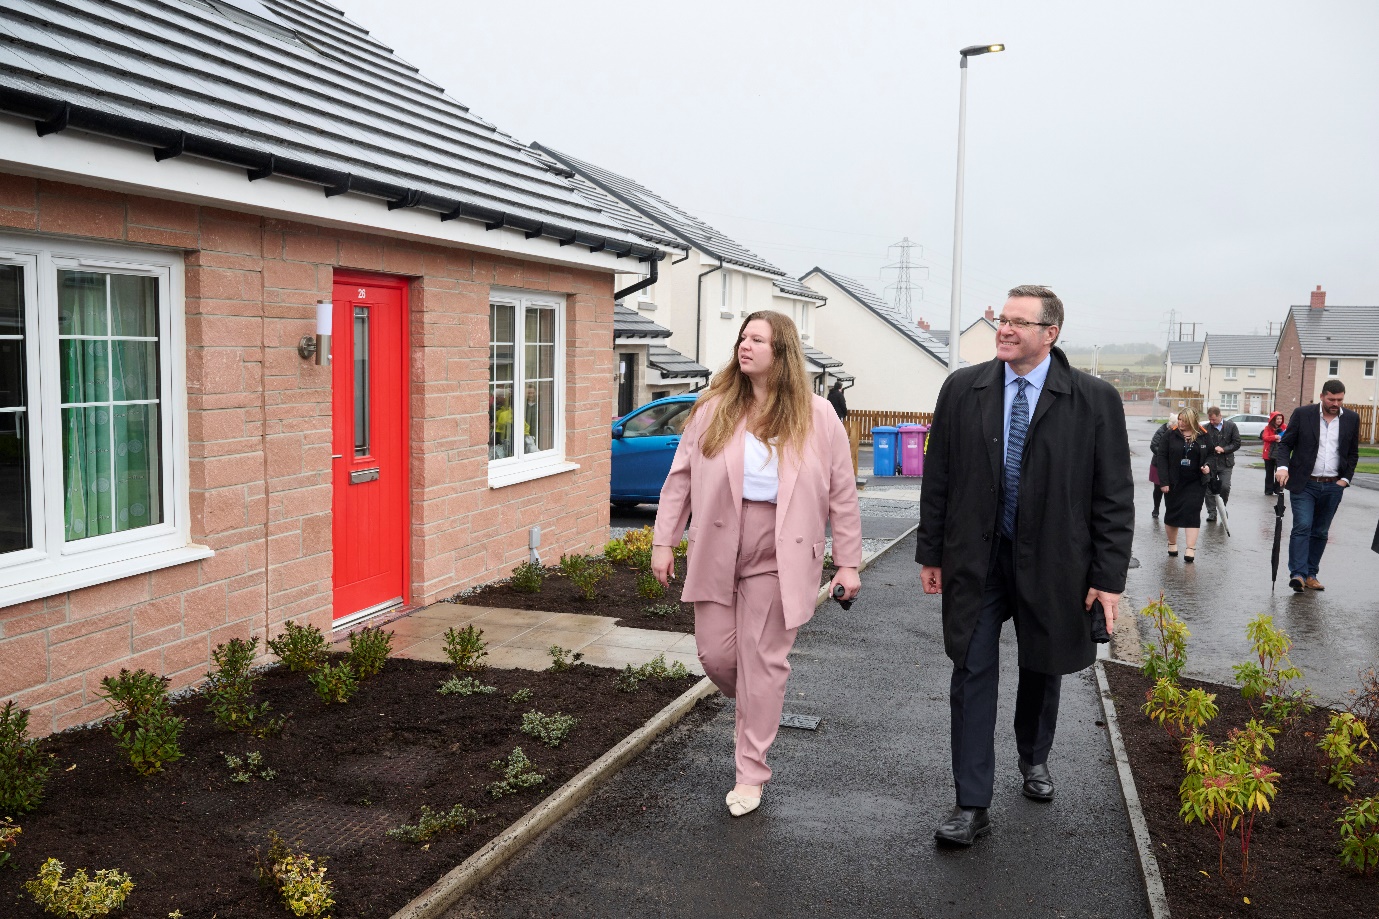 Cairn Housing Association completes 28 new homes in Elgin